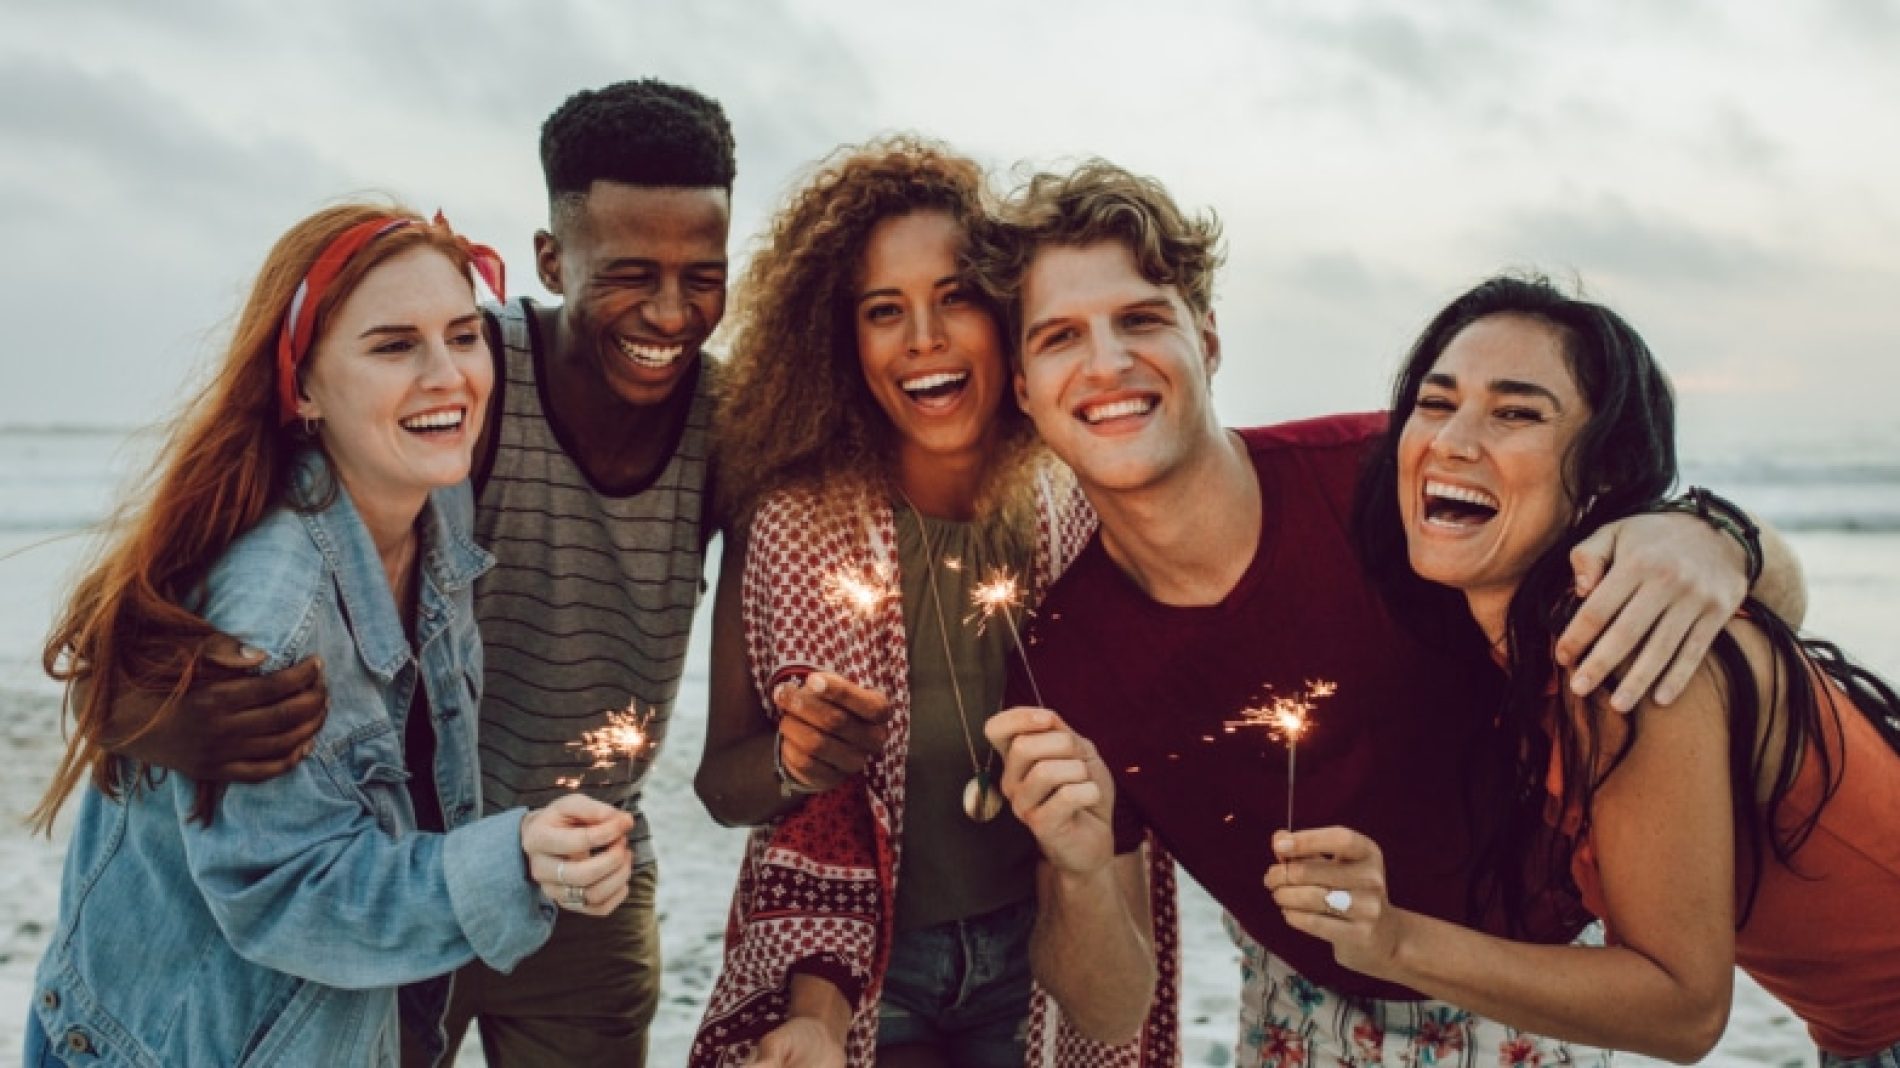 Group-of-young-people-with-sparklers-cXRRed